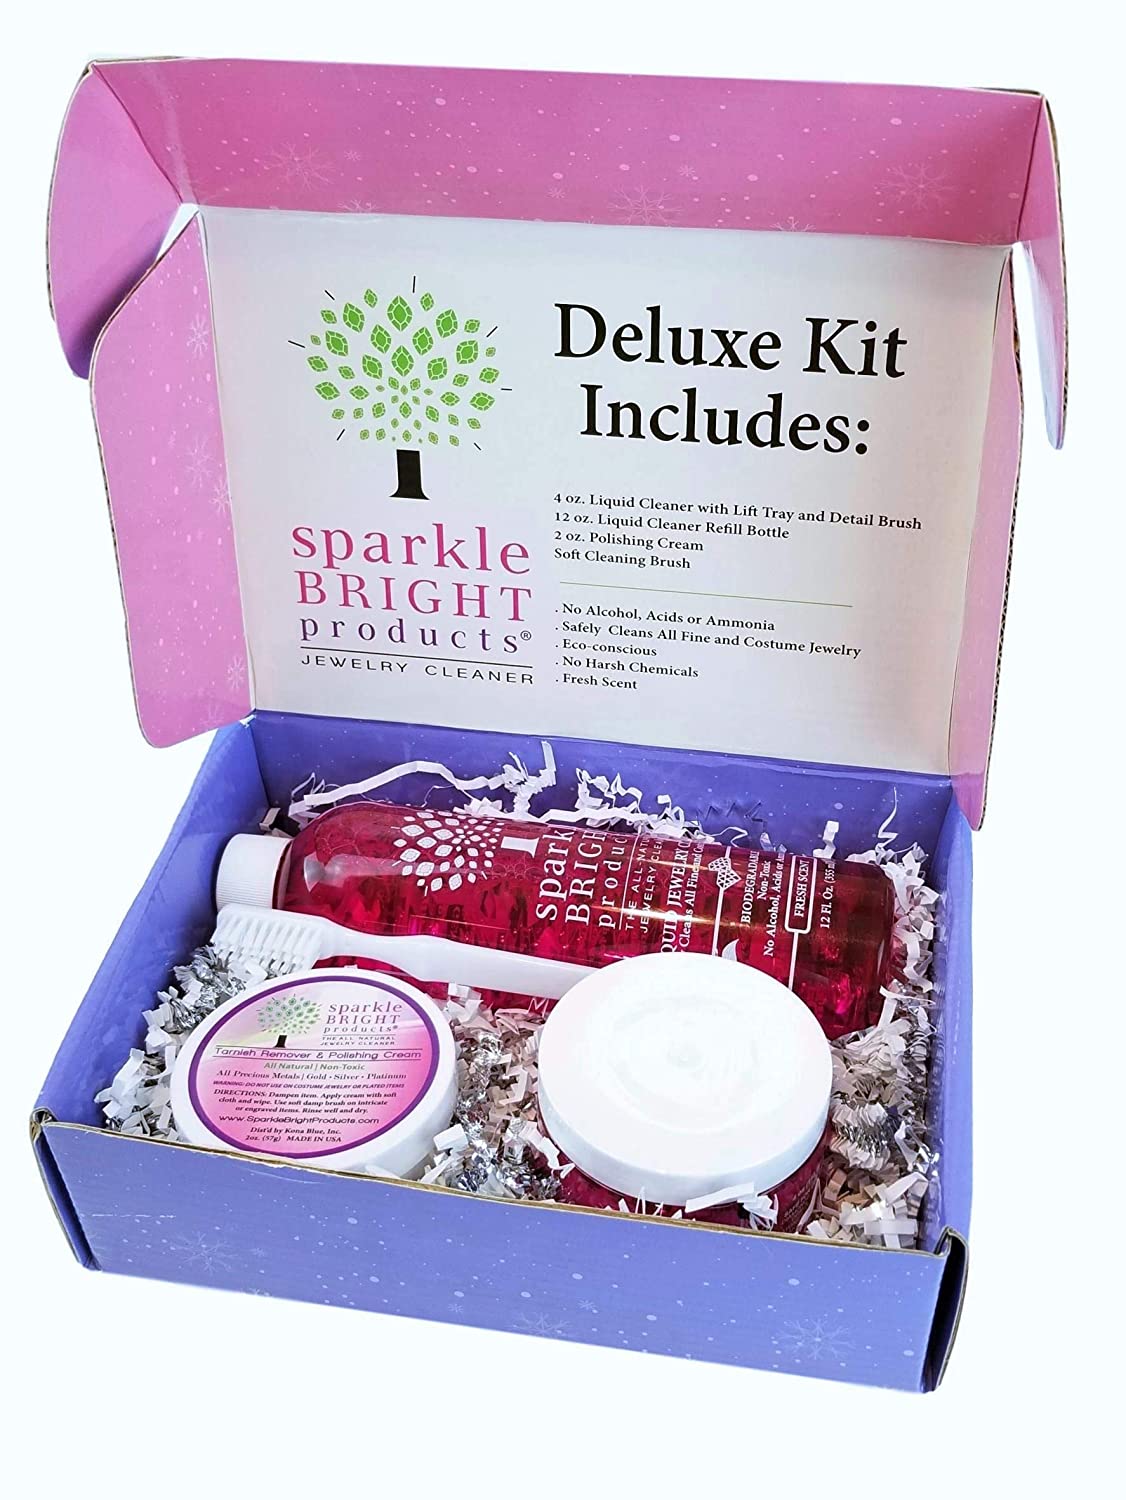 Sparkle Bright Jewelry Cleaner  Deluxe Gift Box Jewelry Cleaning Kit –  Sparkle Bright Products